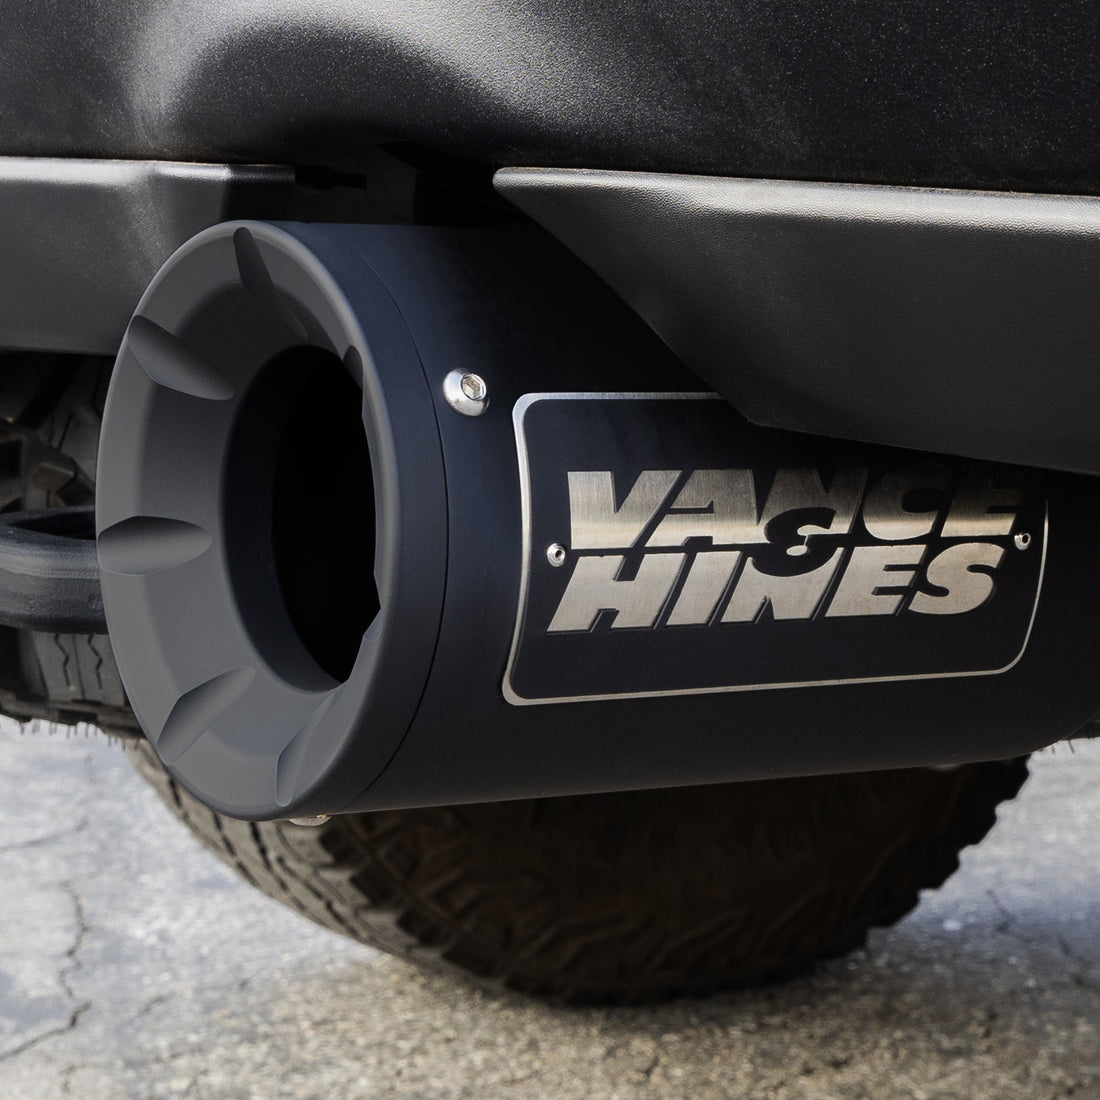 In-Depth Review of the Vance and Hines Exhaust for the TRX